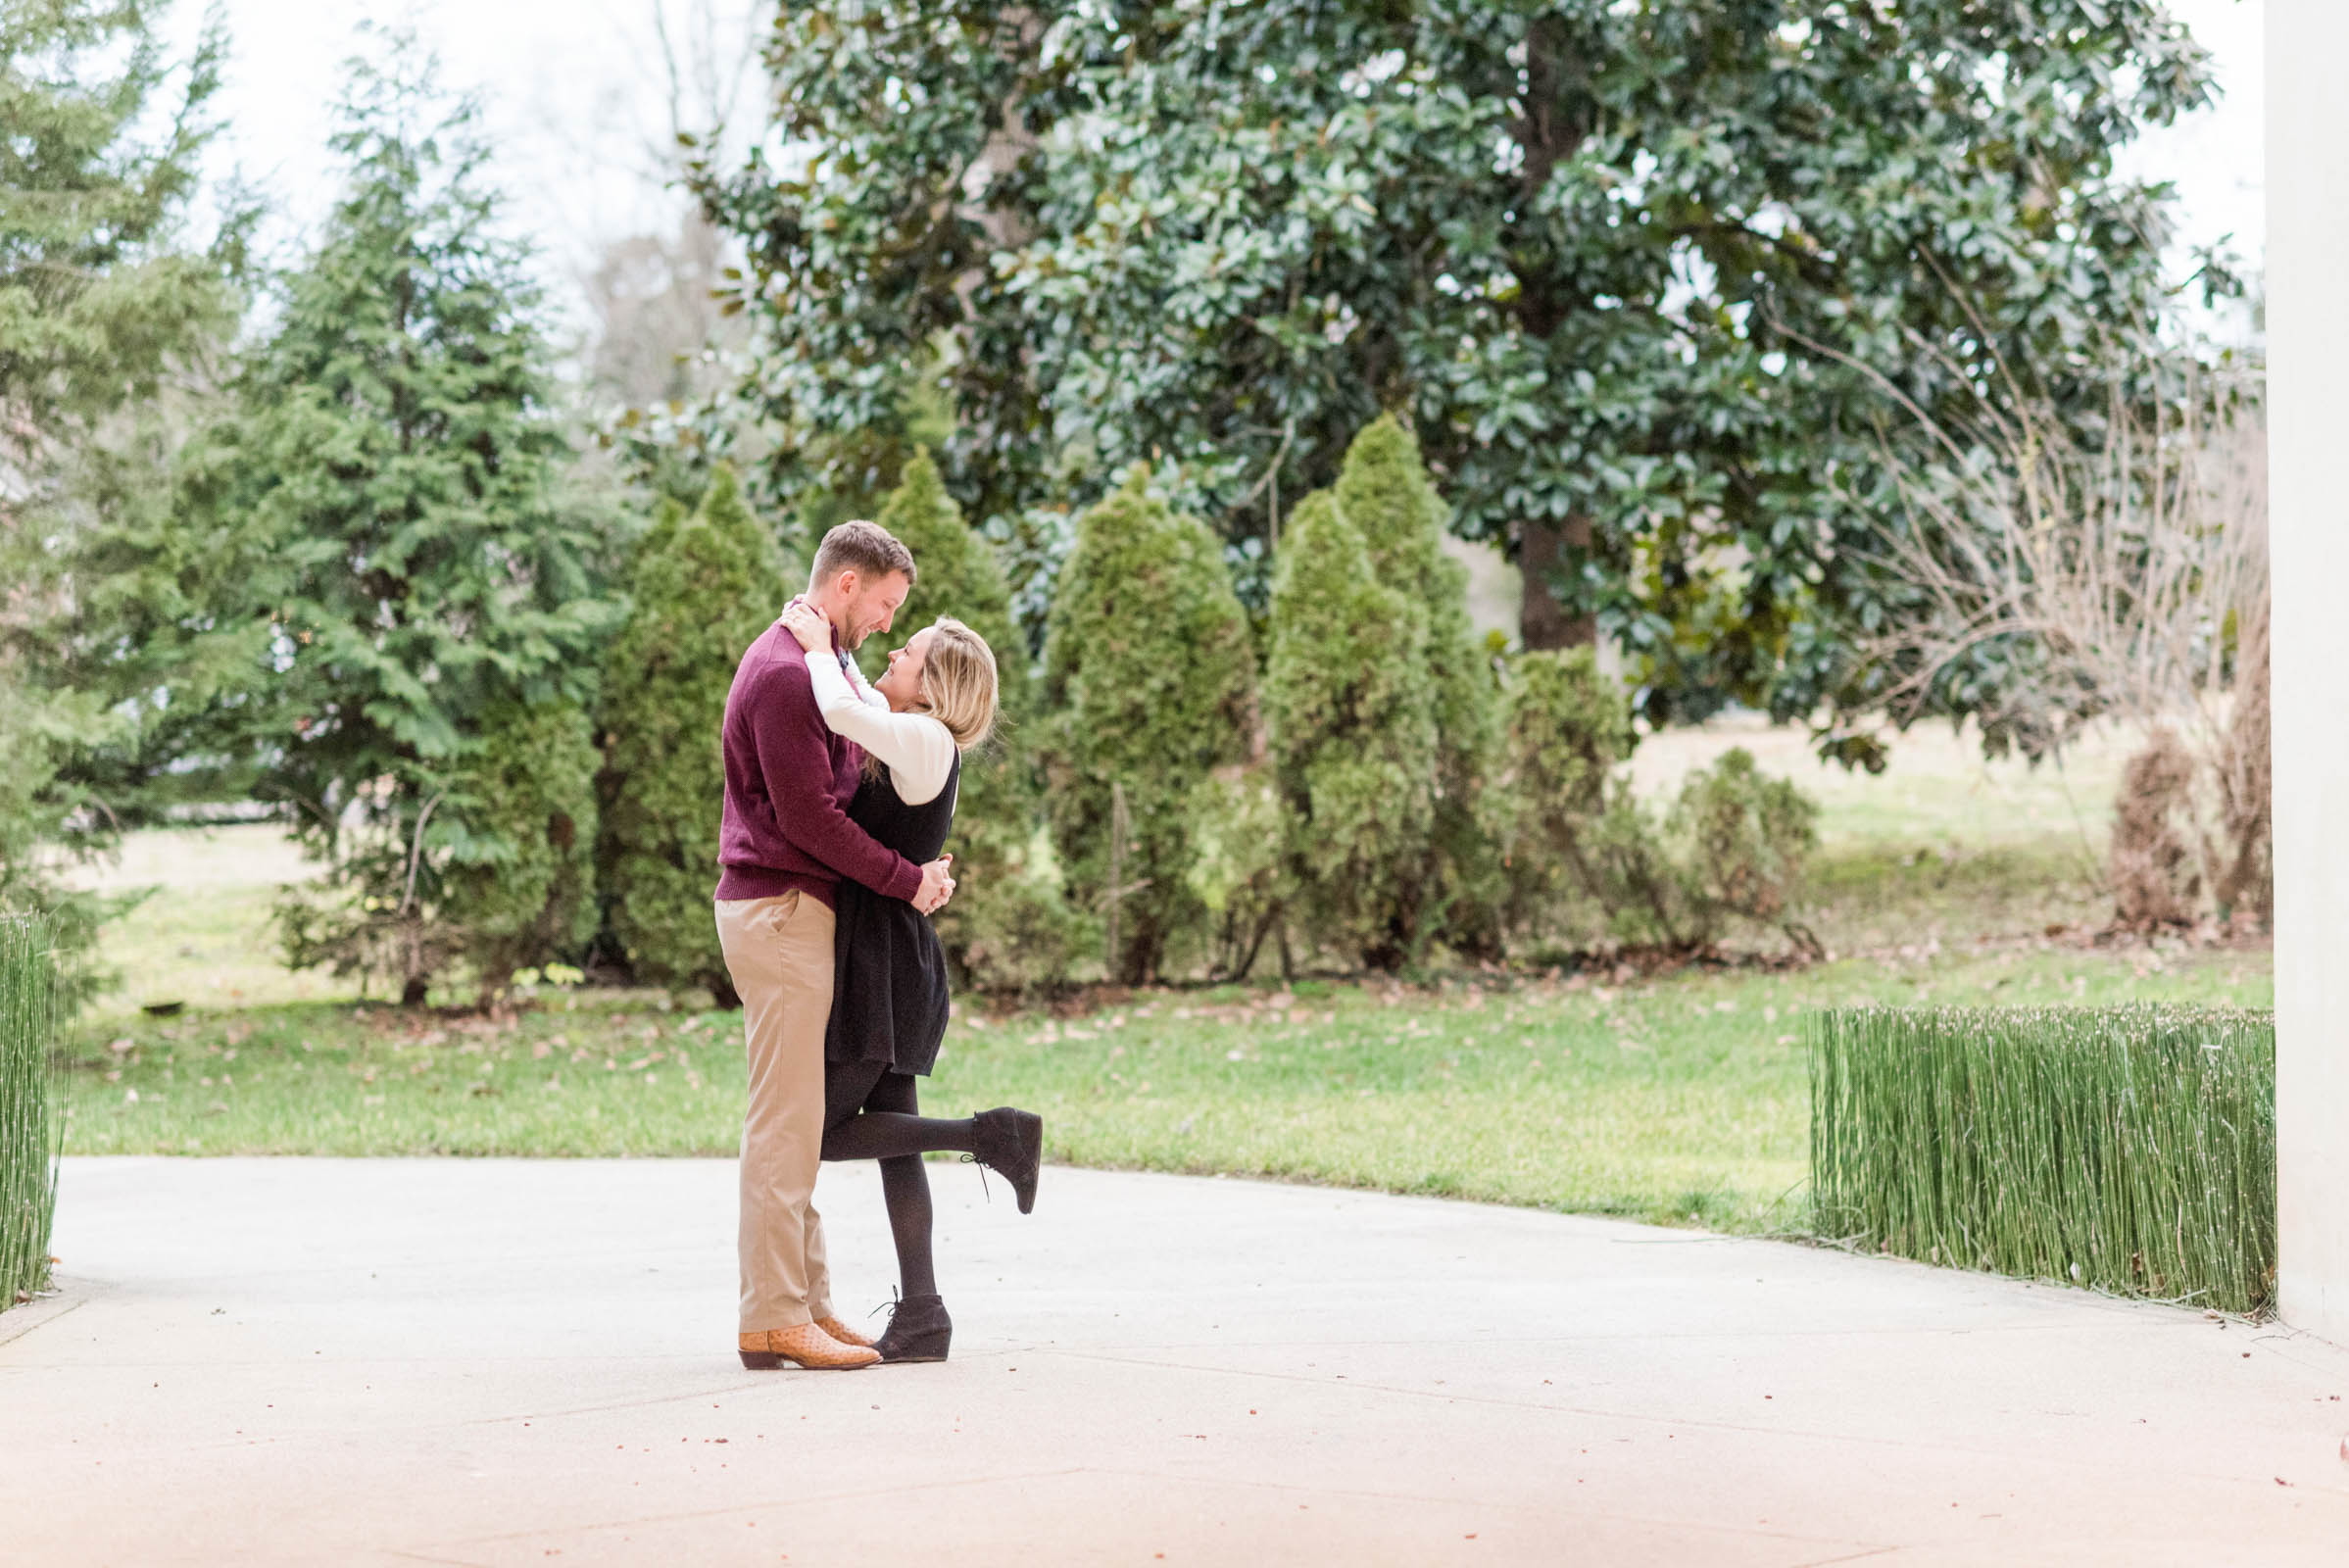 Brennon and Mandi: New Year's Eve Proposal, Nashville, Tennessee - Sweet Williams Photography, Wedding and Portrait Photographer